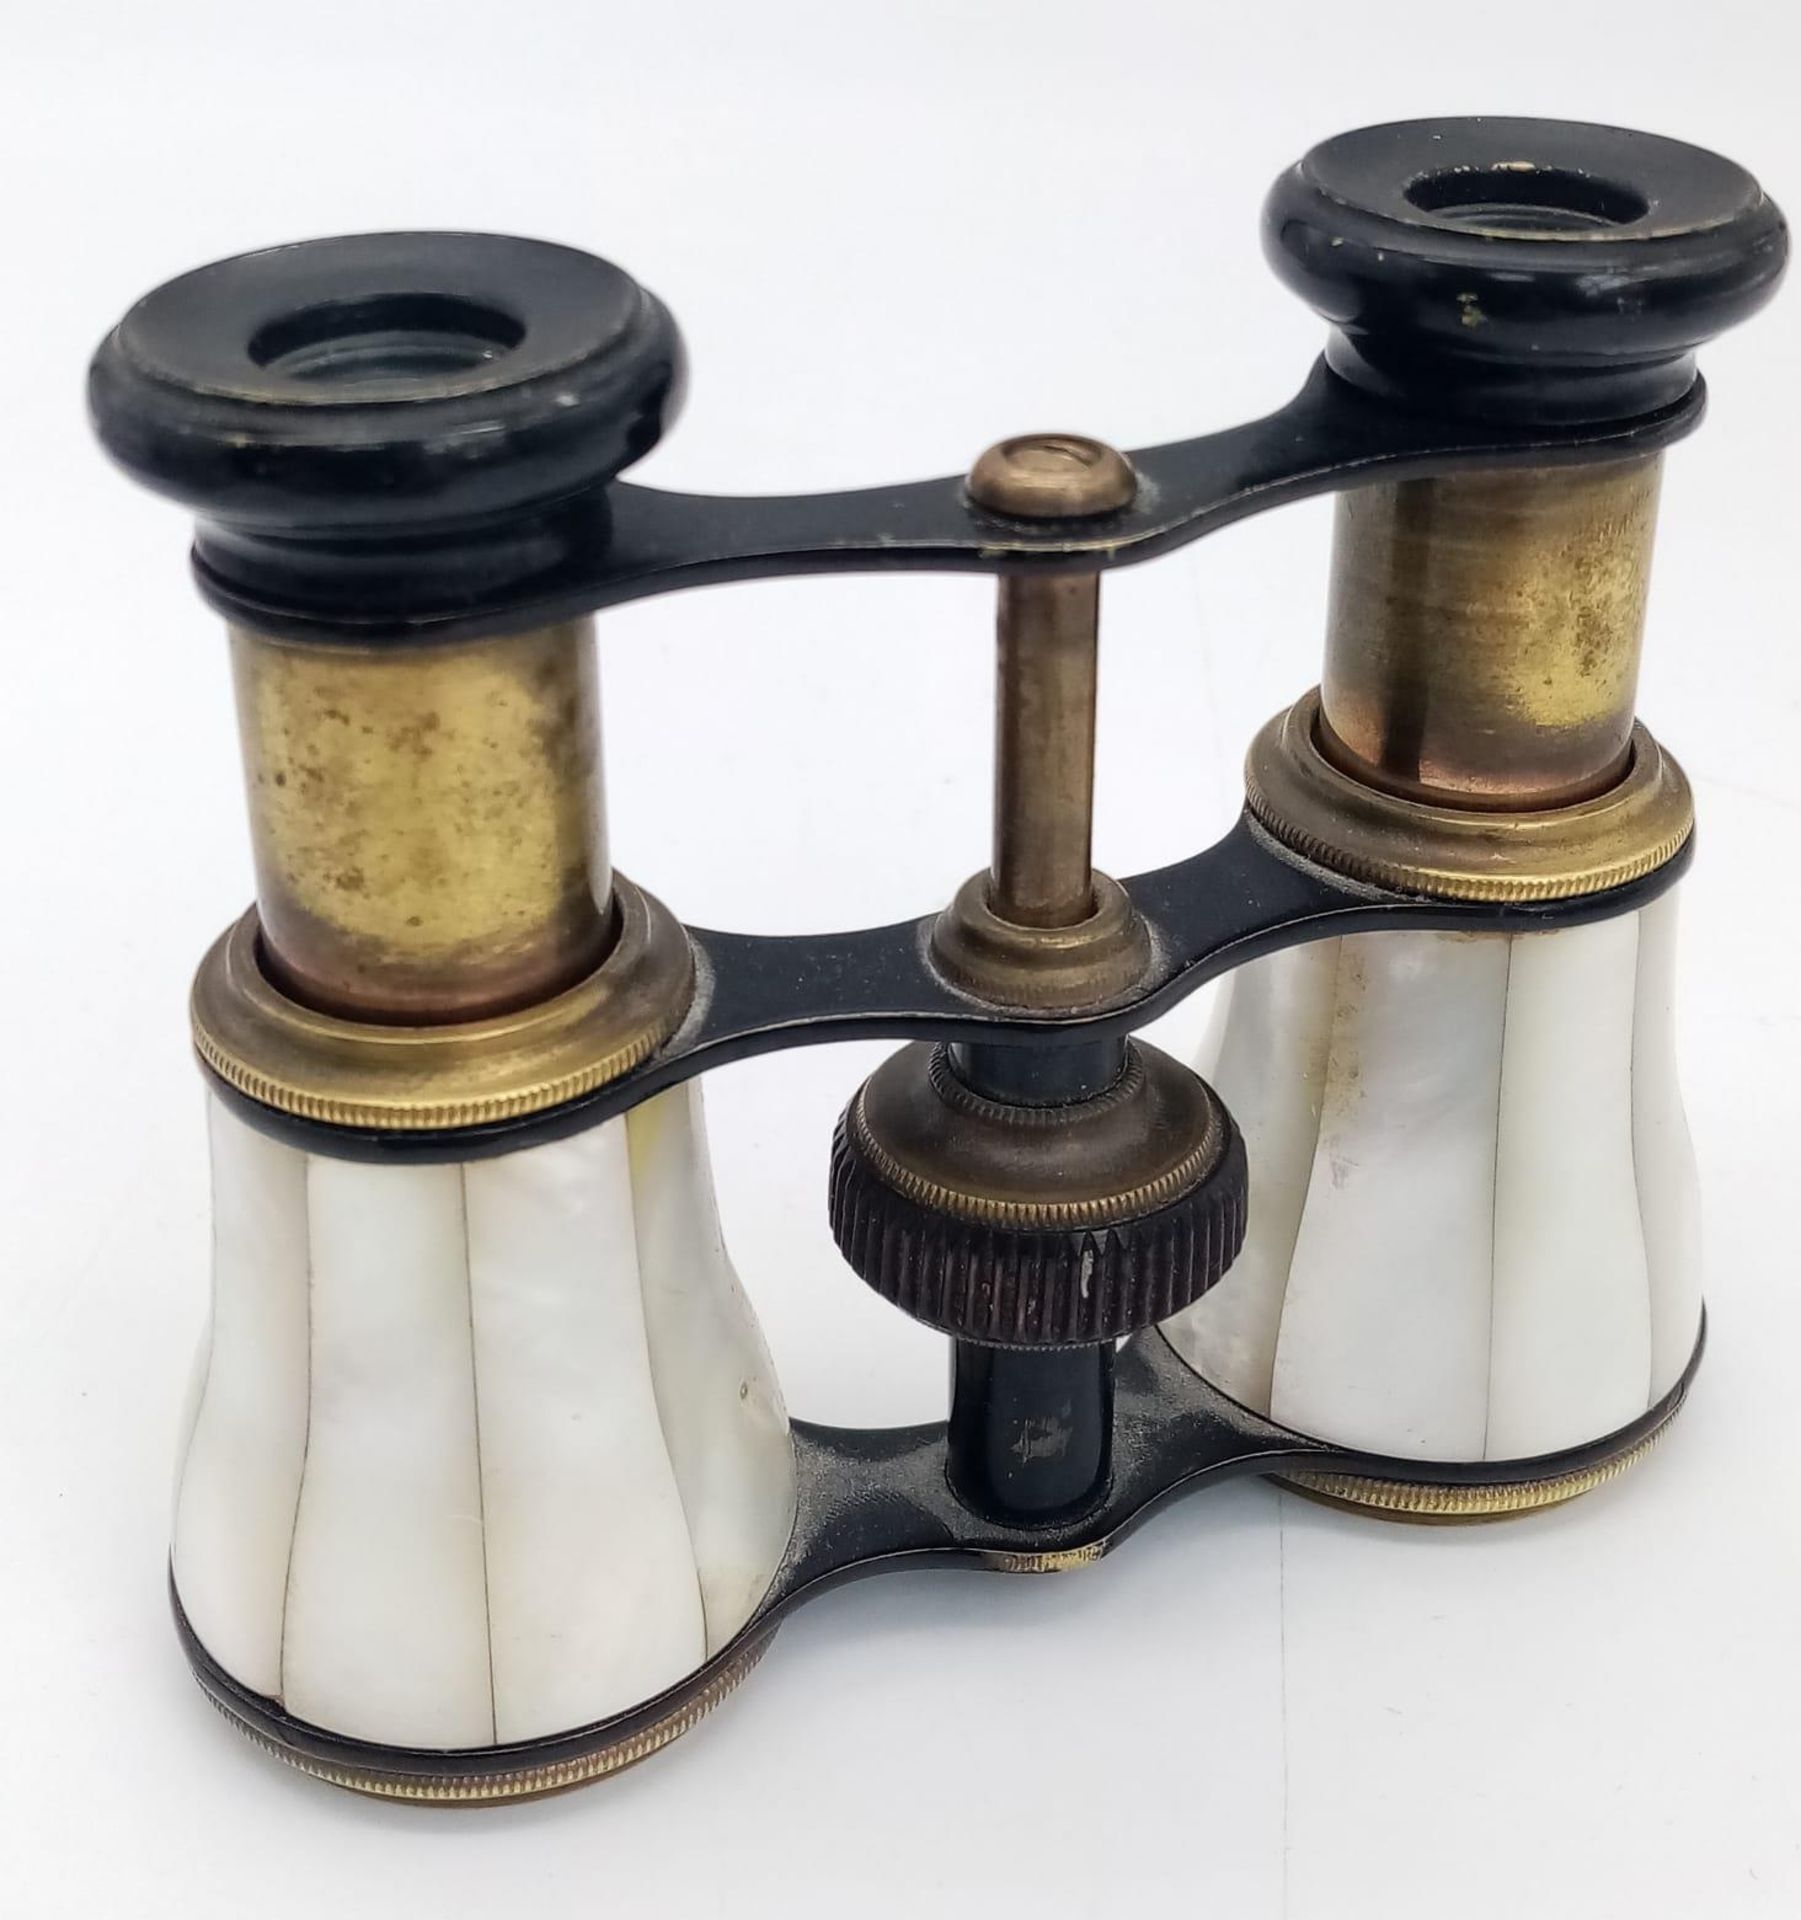 A BEAUTIFUL ANTIQUE OPERA BINOCULARS WITH MOTHER OF PEARL INLAY WORKING ORDER GREAT CONDITION - Image 4 of 4